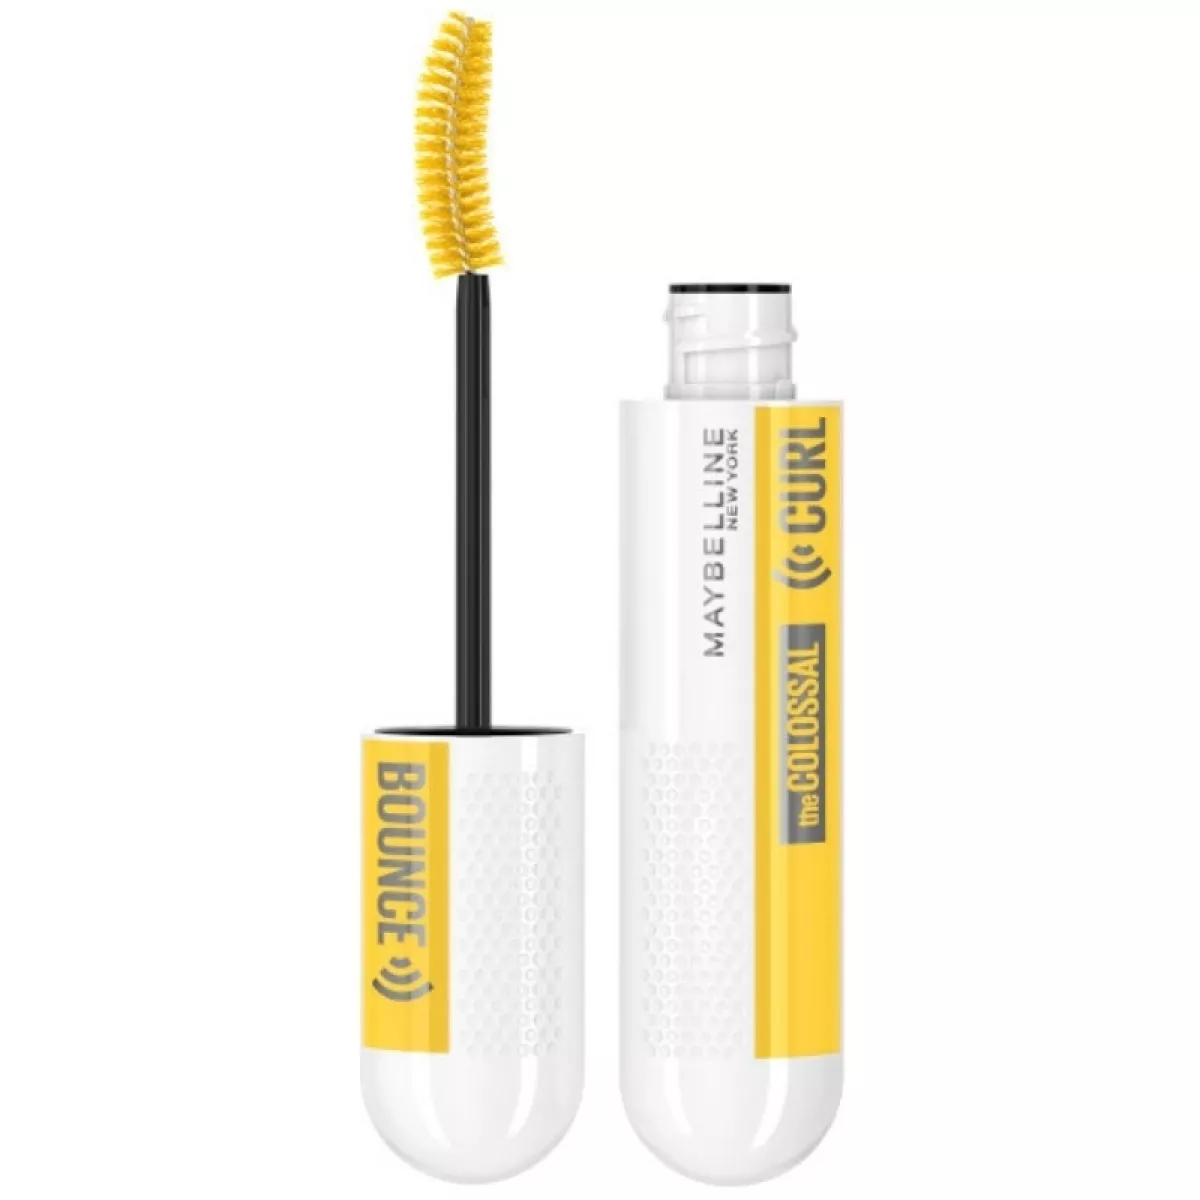 #1 - Maybelline The Colossal Mascara Curl Bounce 10 ml - Black